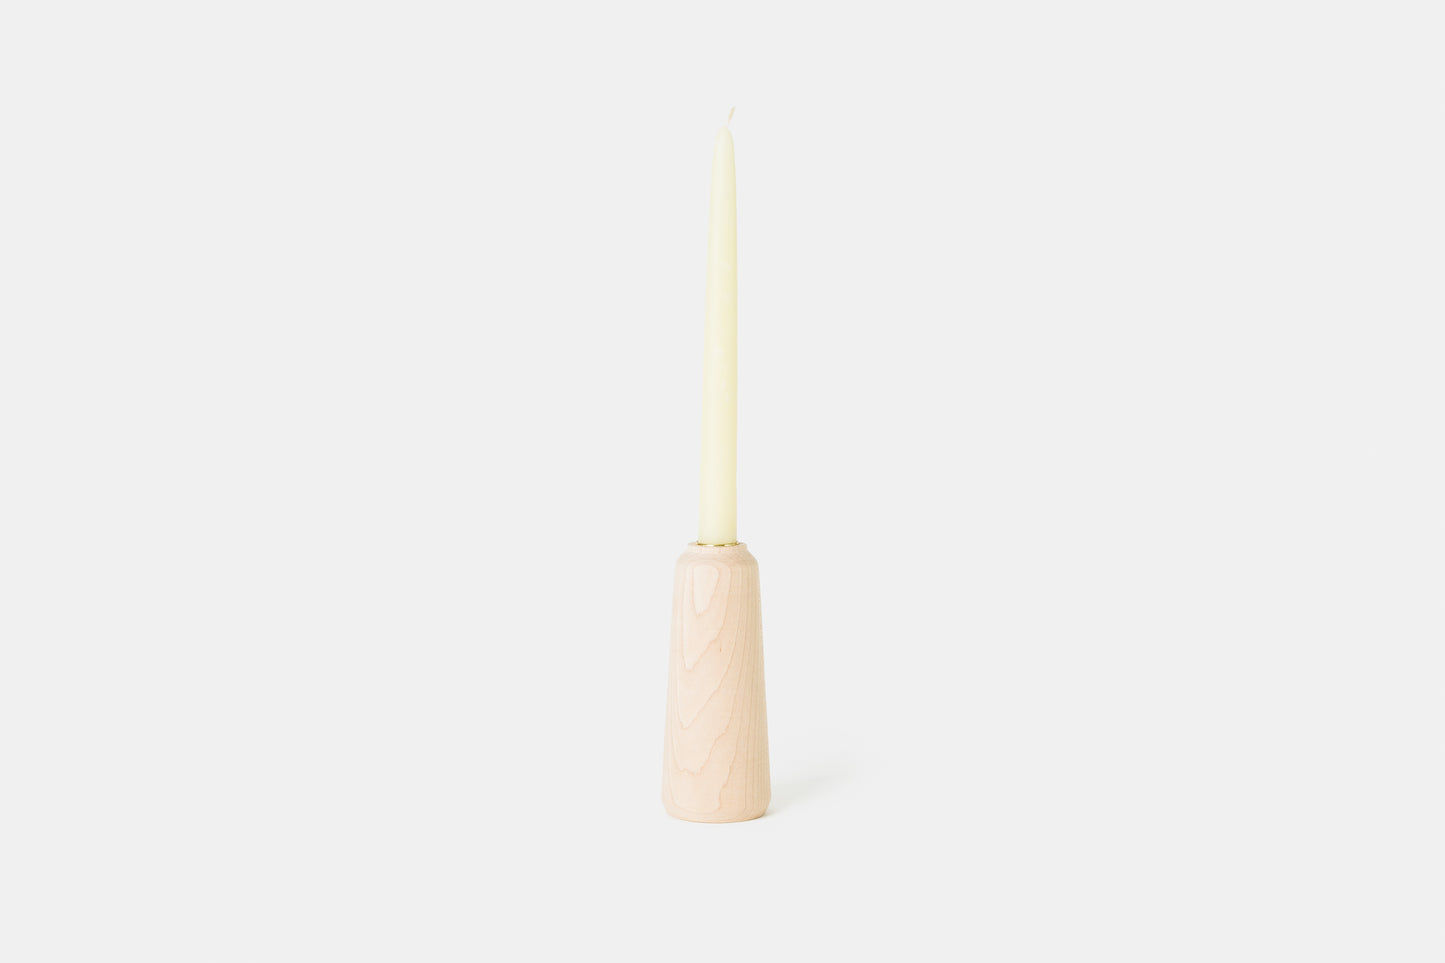 6" Handmade hardwood candle holder in Maple. In a sleek, minimalistic design. Made by Melanie Abrantes Designs.